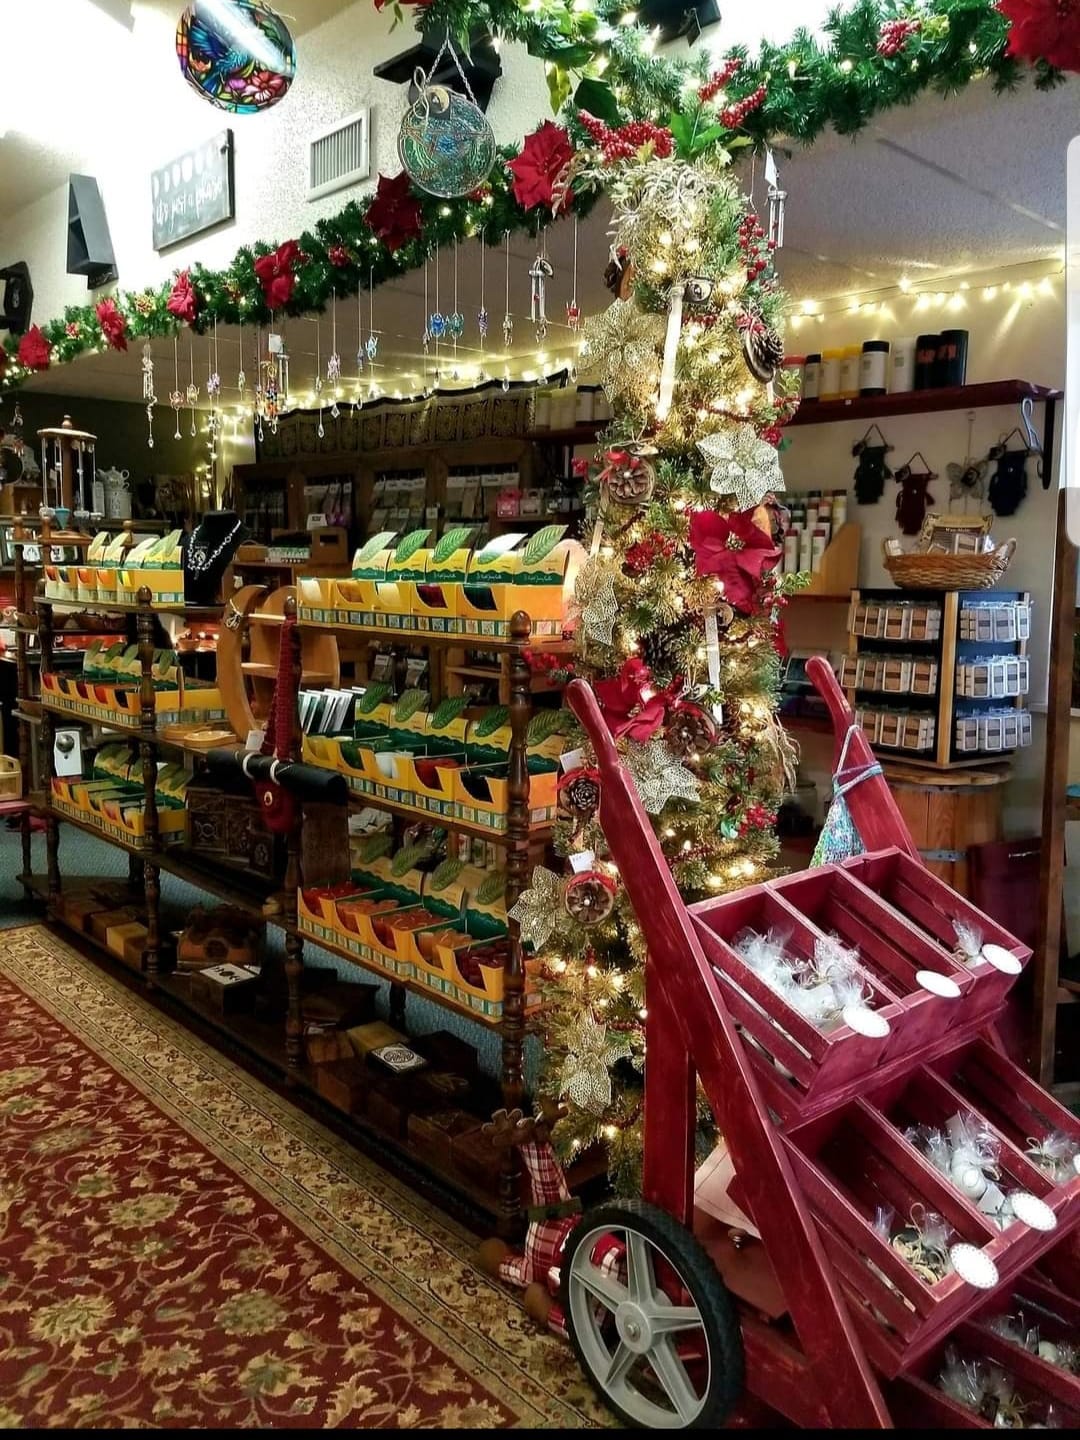 Looking to shop local this holiday season? Take your gift list to these Marshfield area stores.